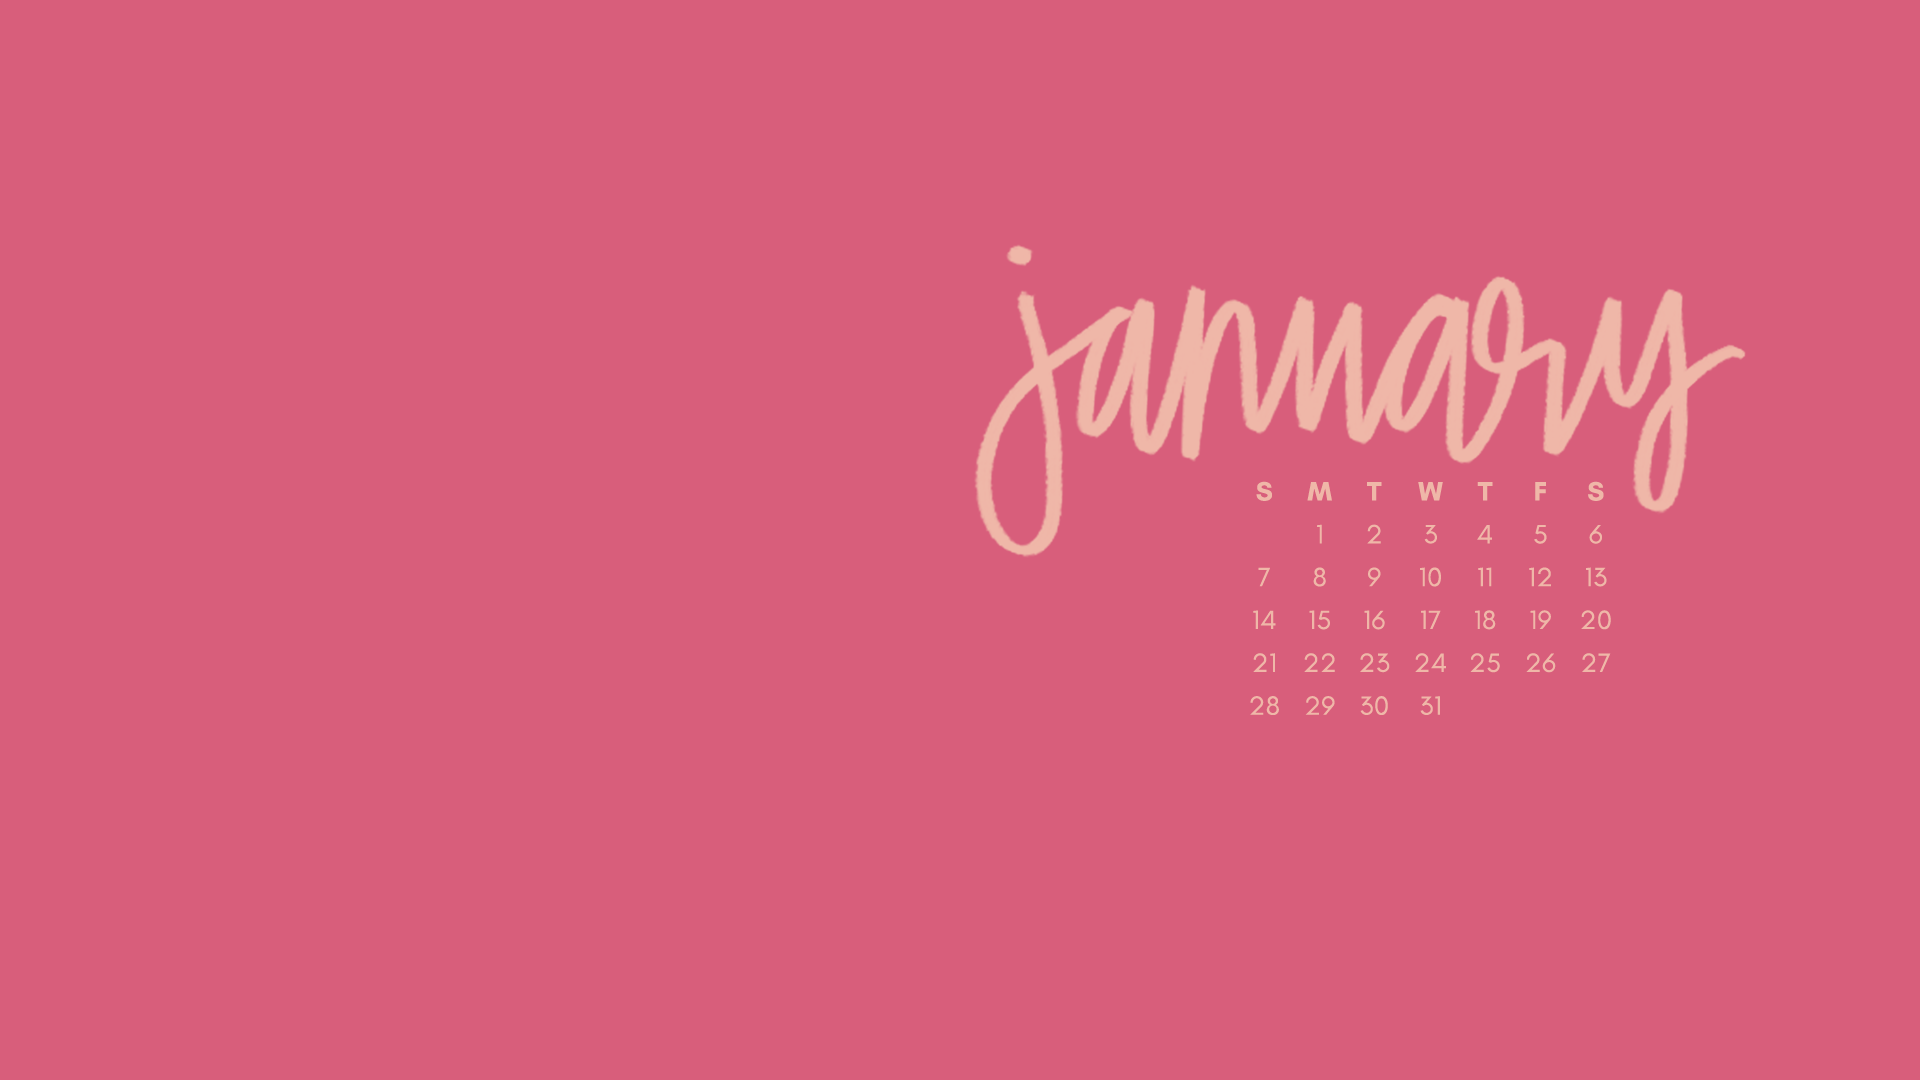 January 2018 Wallpapers Folder Icons   Whatever Bright 1920x1080